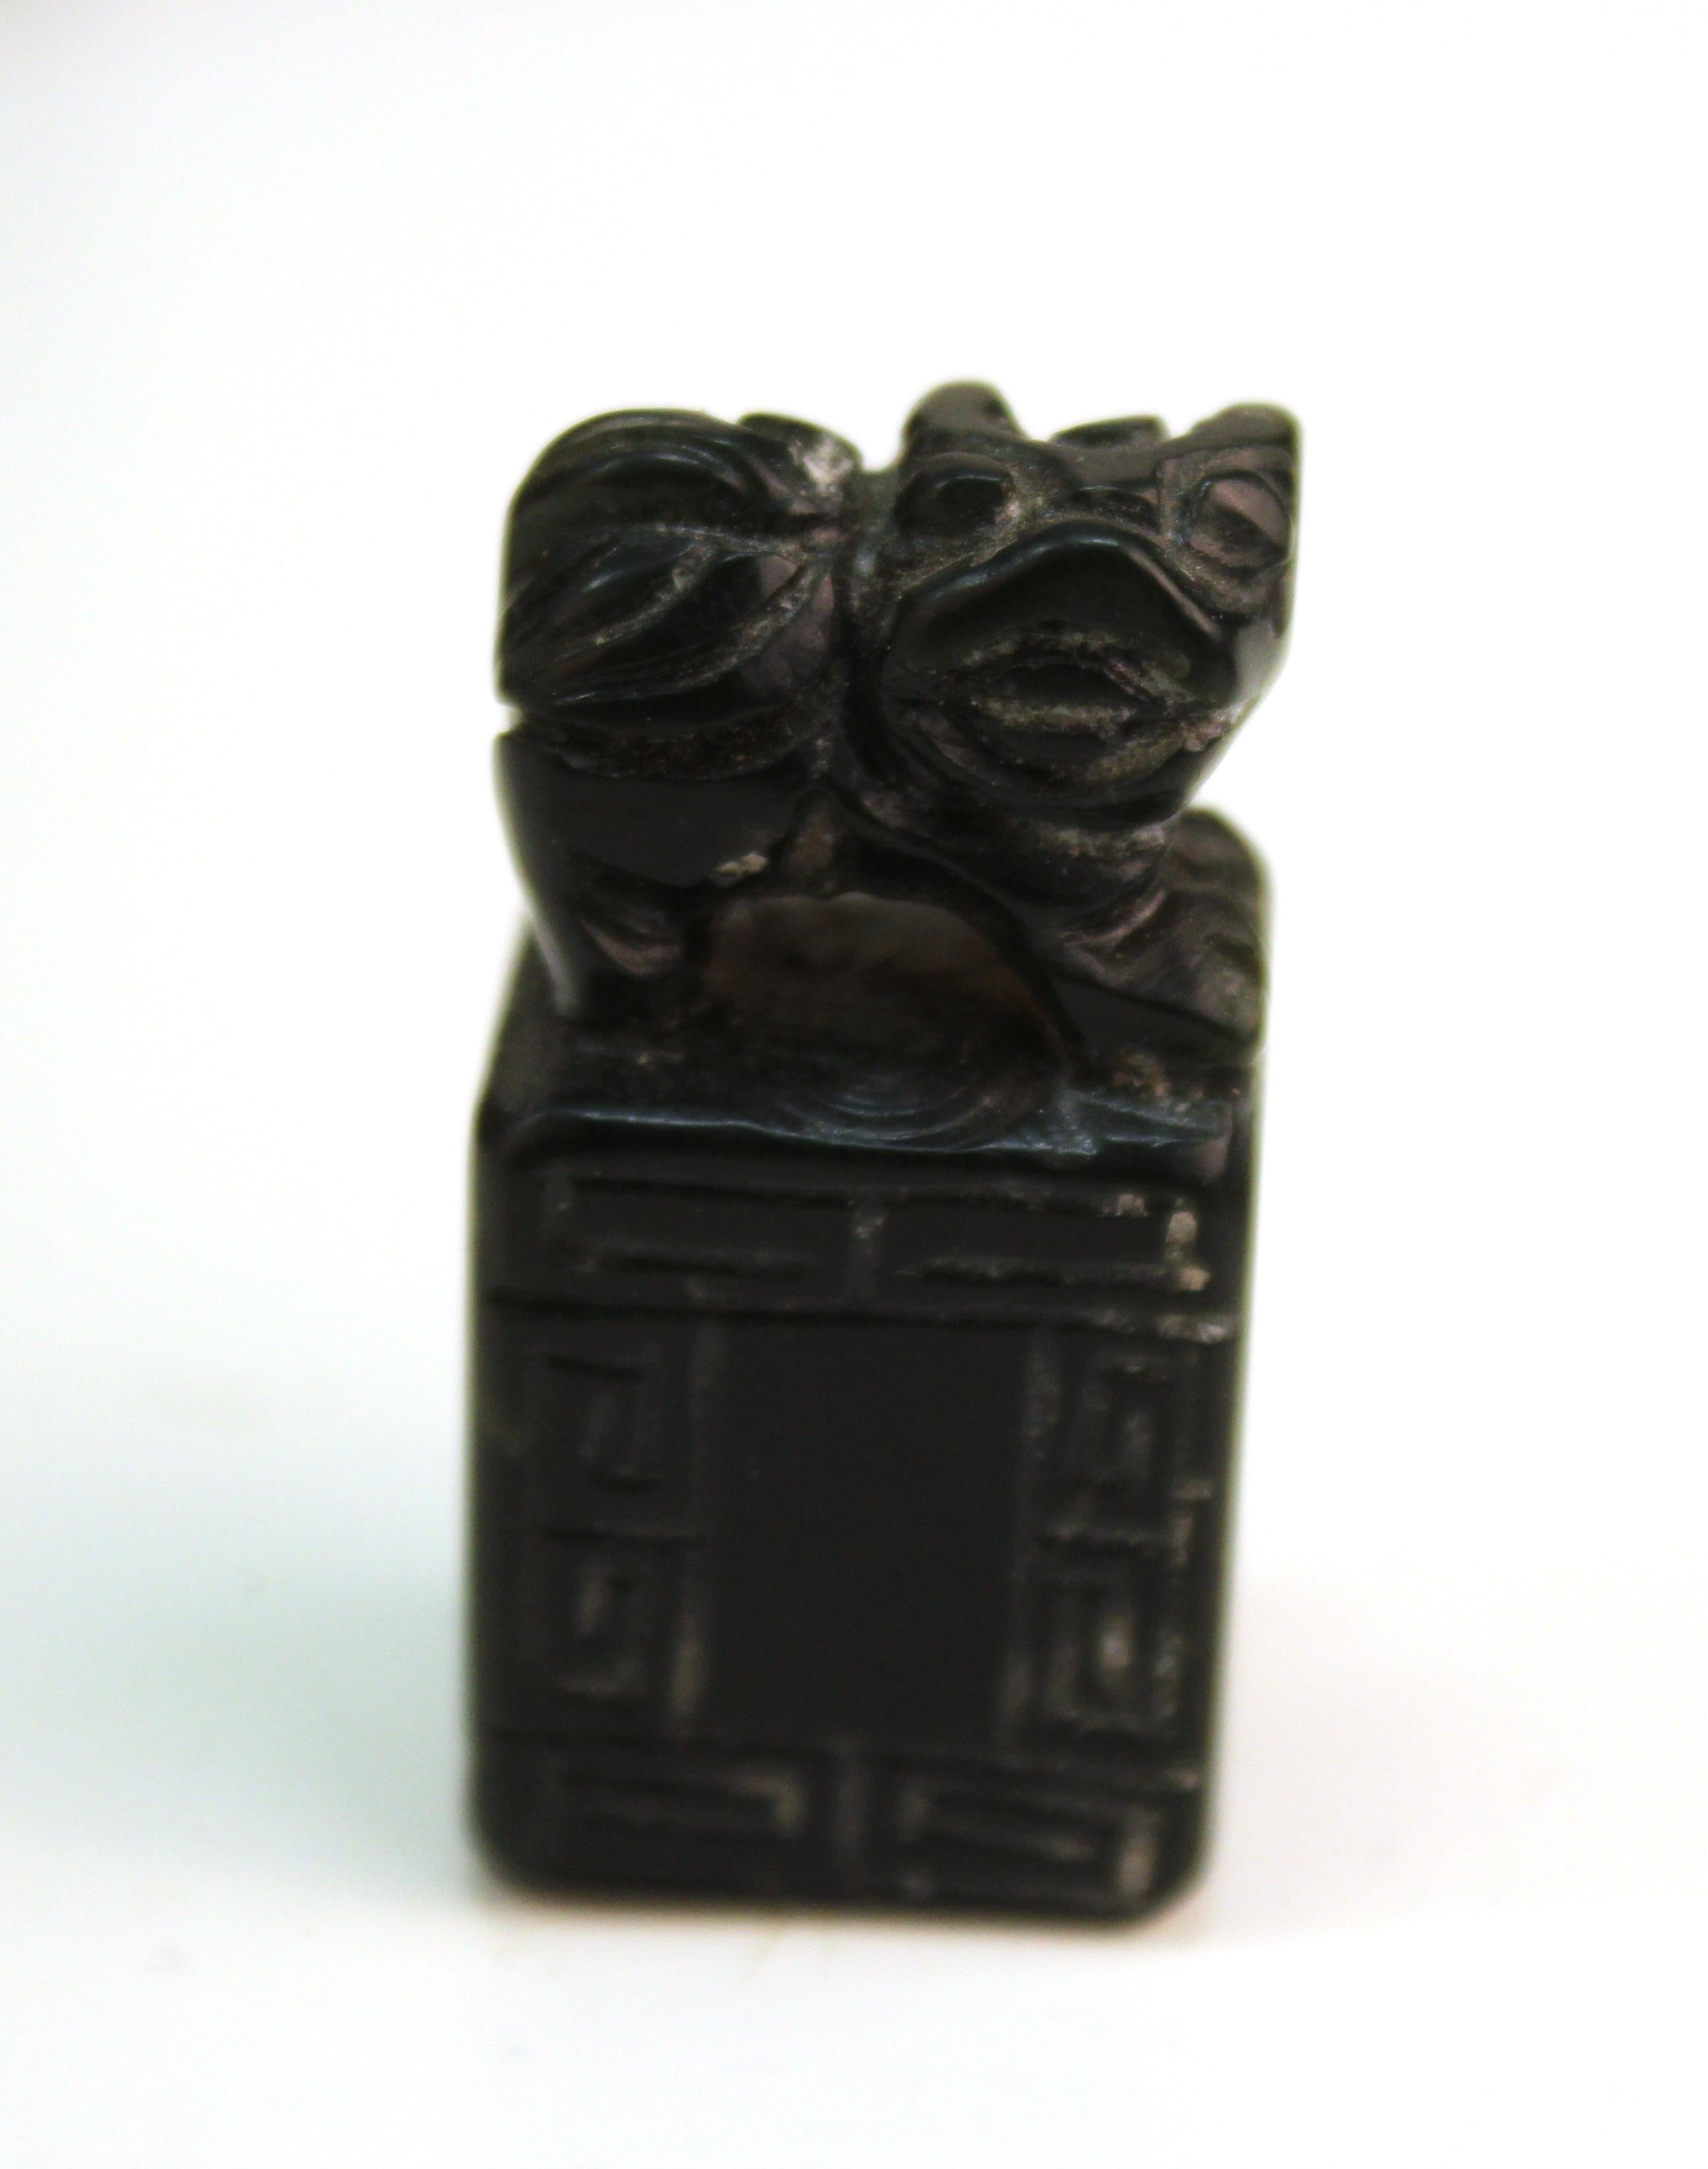 Chinese Carved Soap Stone Figurines 2